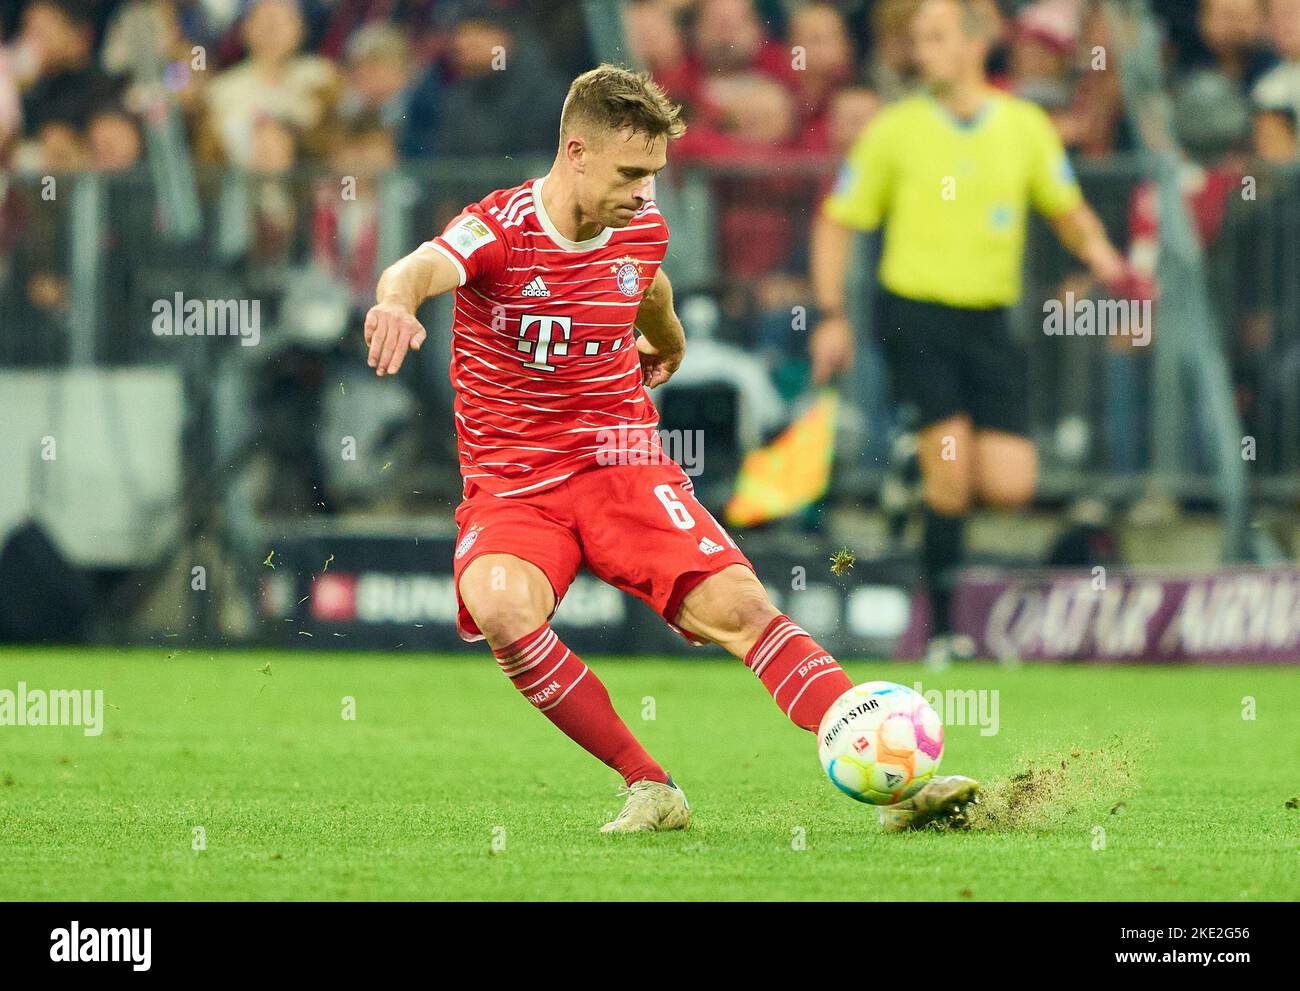 Joshua KIMMICH, FCB 6   in the match FC BAYERN MÜNCHEN - SV WERDER BREMEN 6-1 1.German Football League on Nov 8, 2022 in Munich, Germany. Season 2022/2023, matchday 14, 1.Bundesliga, FCB, München, 14.Spieltag © Peter Schatz / Alamy Live News    - DFL REGULATIONS PROHIBIT ANY USE OF PHOTOGRAPHS as IMAGE SEQUENCES and/or QUASI-VIDEO - Stock Photo